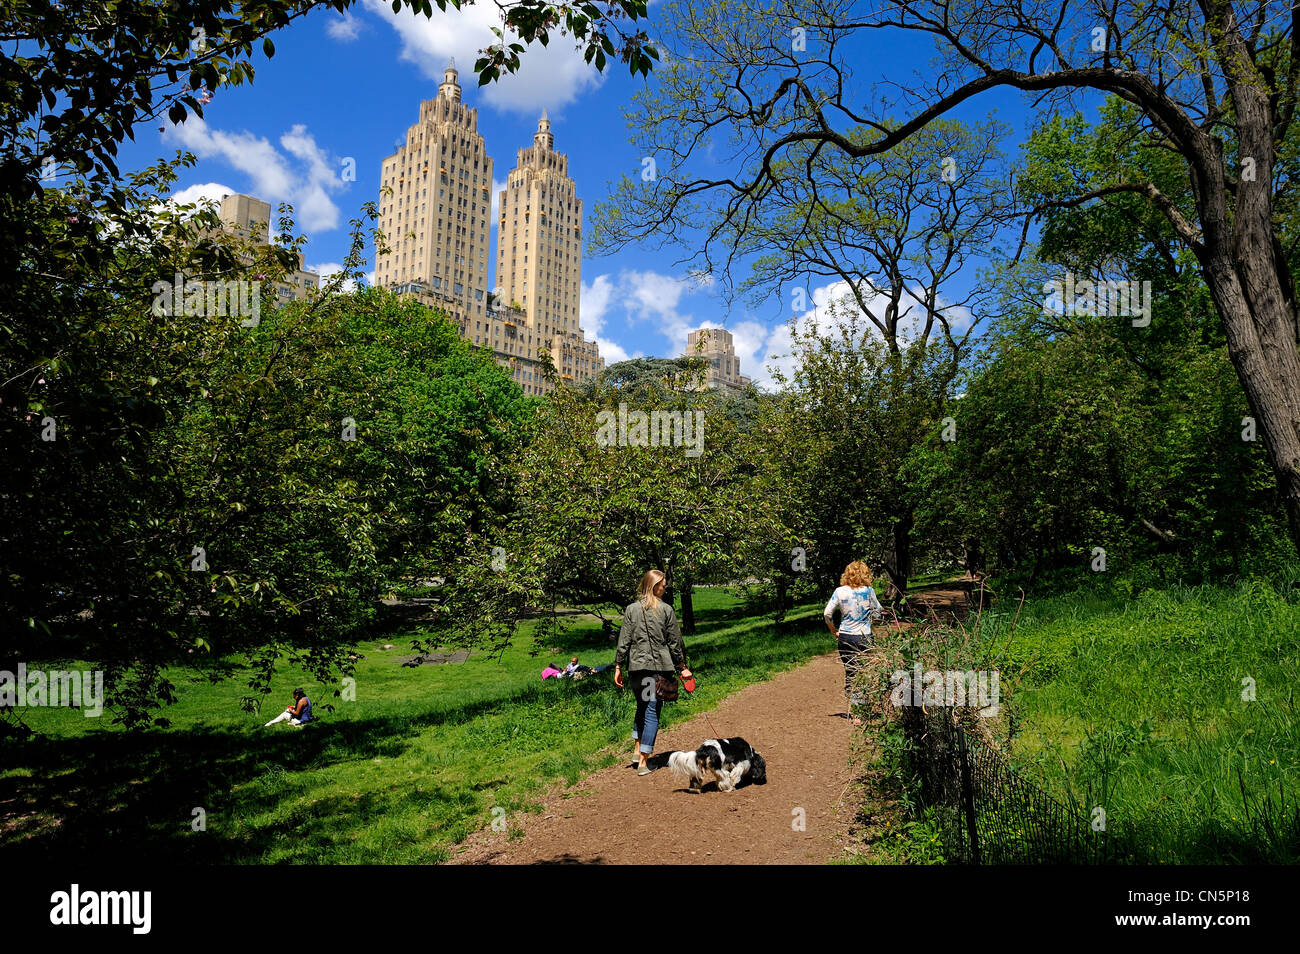 United States, New York City, Manhattan, Upper West side, the El Dorado building seen from Central Park Stock Photo